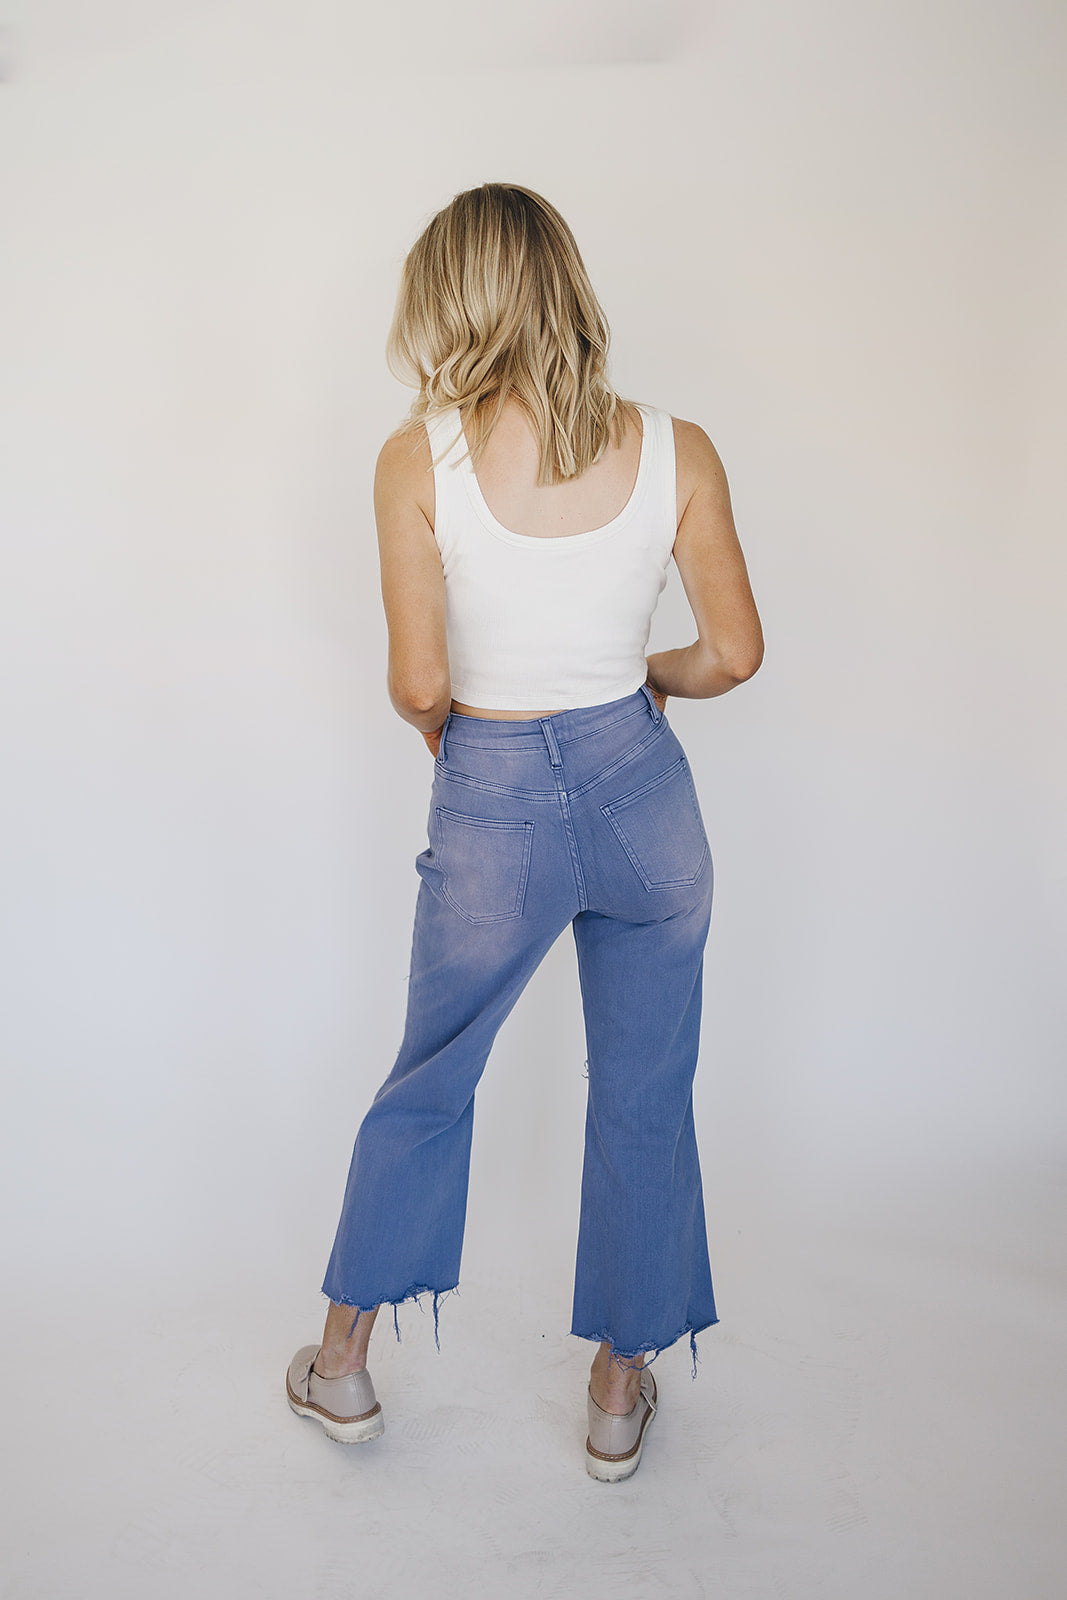 [PREORDER] Garment-Dyed Distressed Cropped Wide Leg Jeans - Marlin